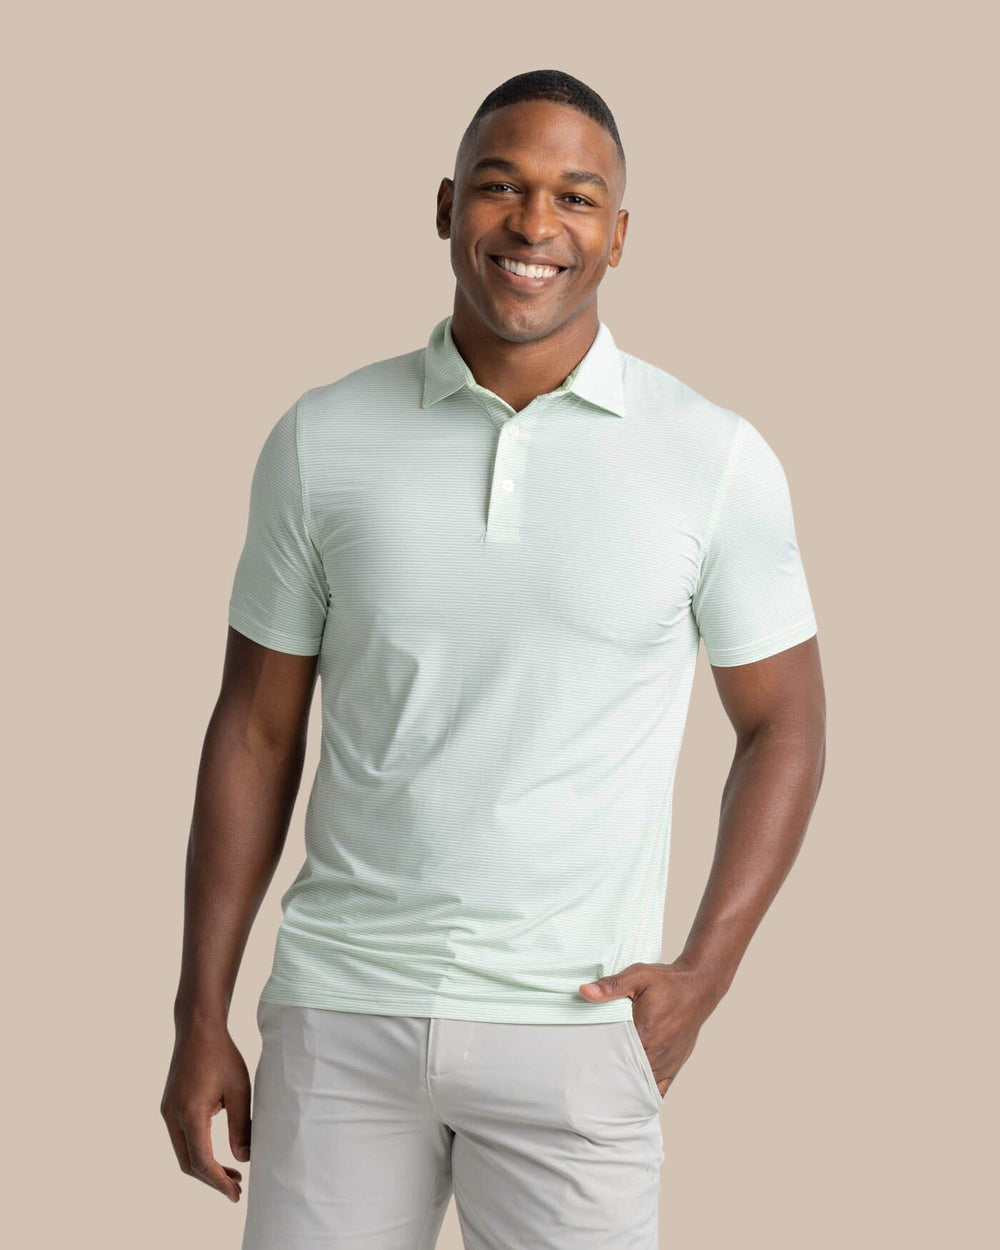 The front view of the Southern Tide brrr-eeze Meadowbrook Stripe Polo by Southern Tide - Smoke Green